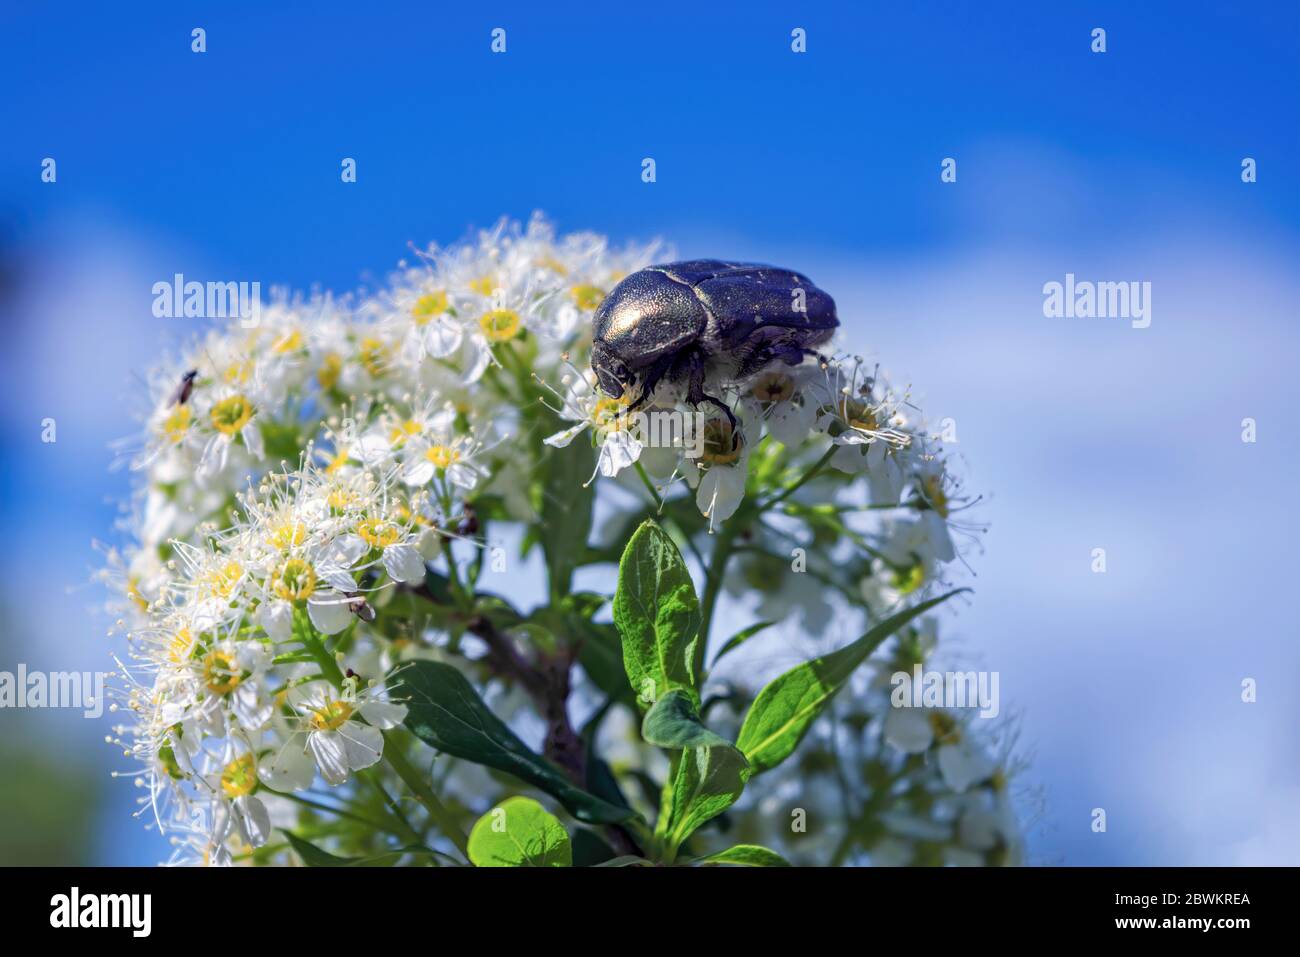 Macro shiny green beetle of a Scarab Cetonia seated on a white flower inflorescence. Stock Photo